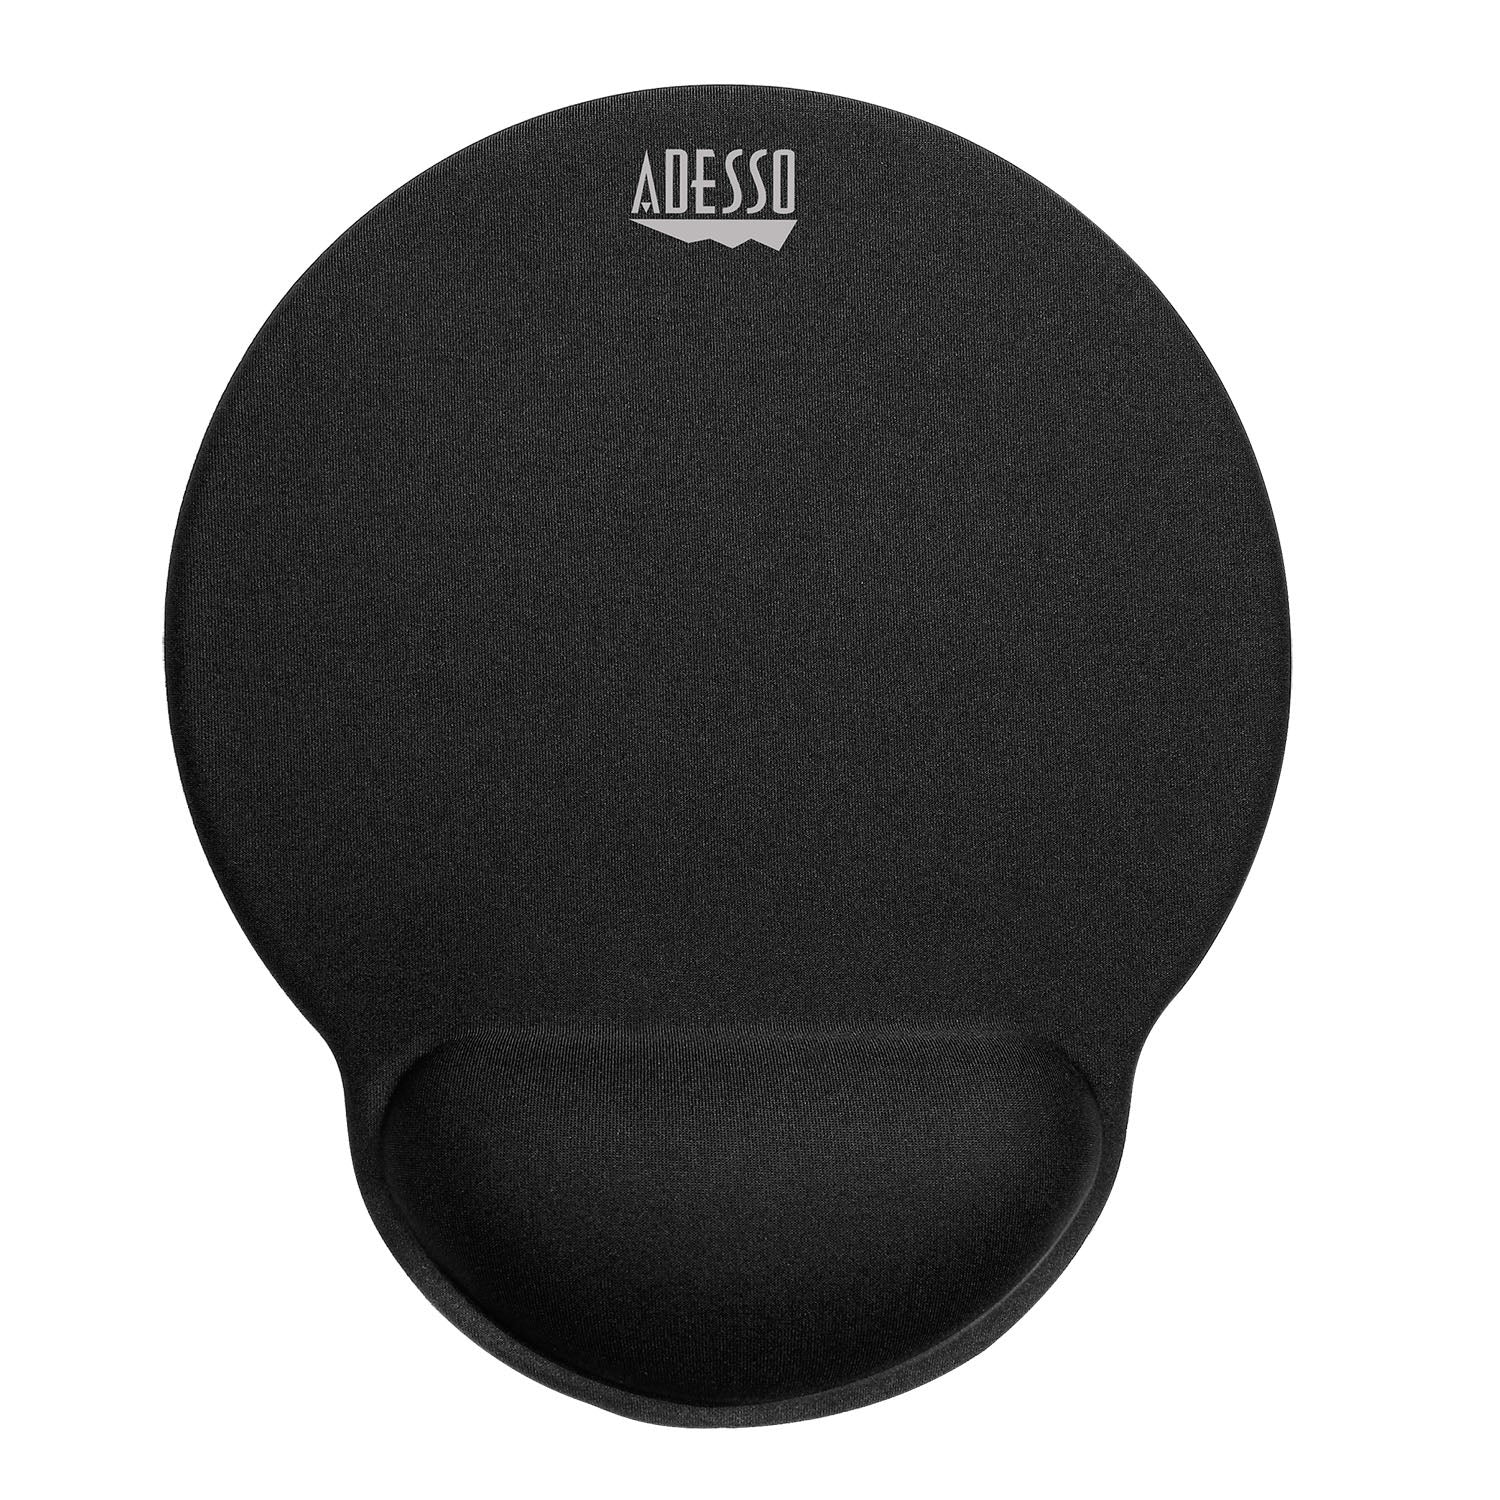 TruForm P200 - Memory Foam Mouse Pad with Wrist Rest